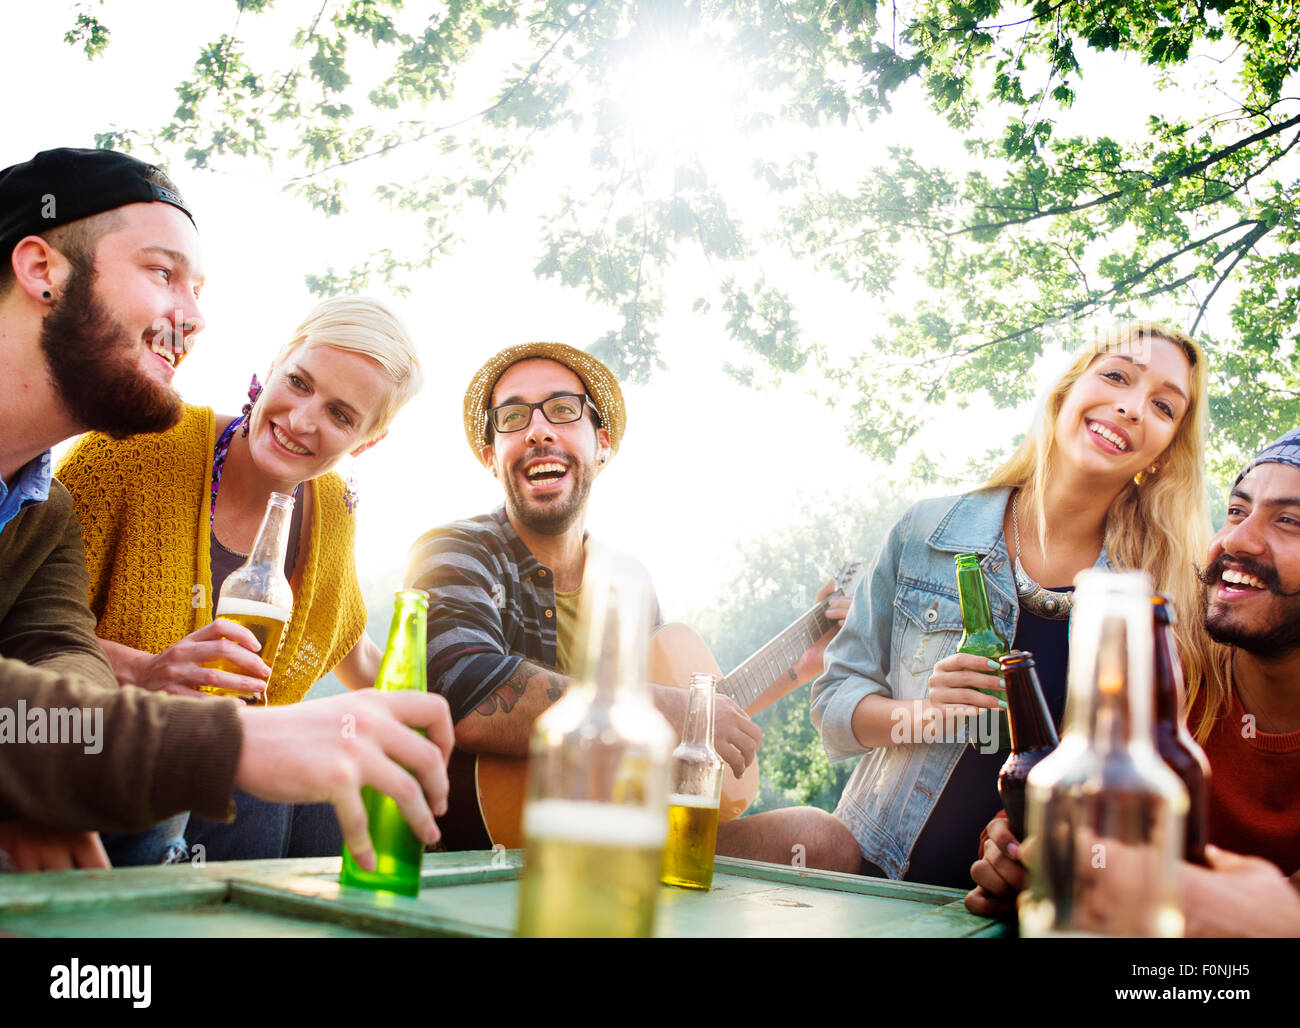 Diverse People Friends Hanging Out Concept Stock Photo